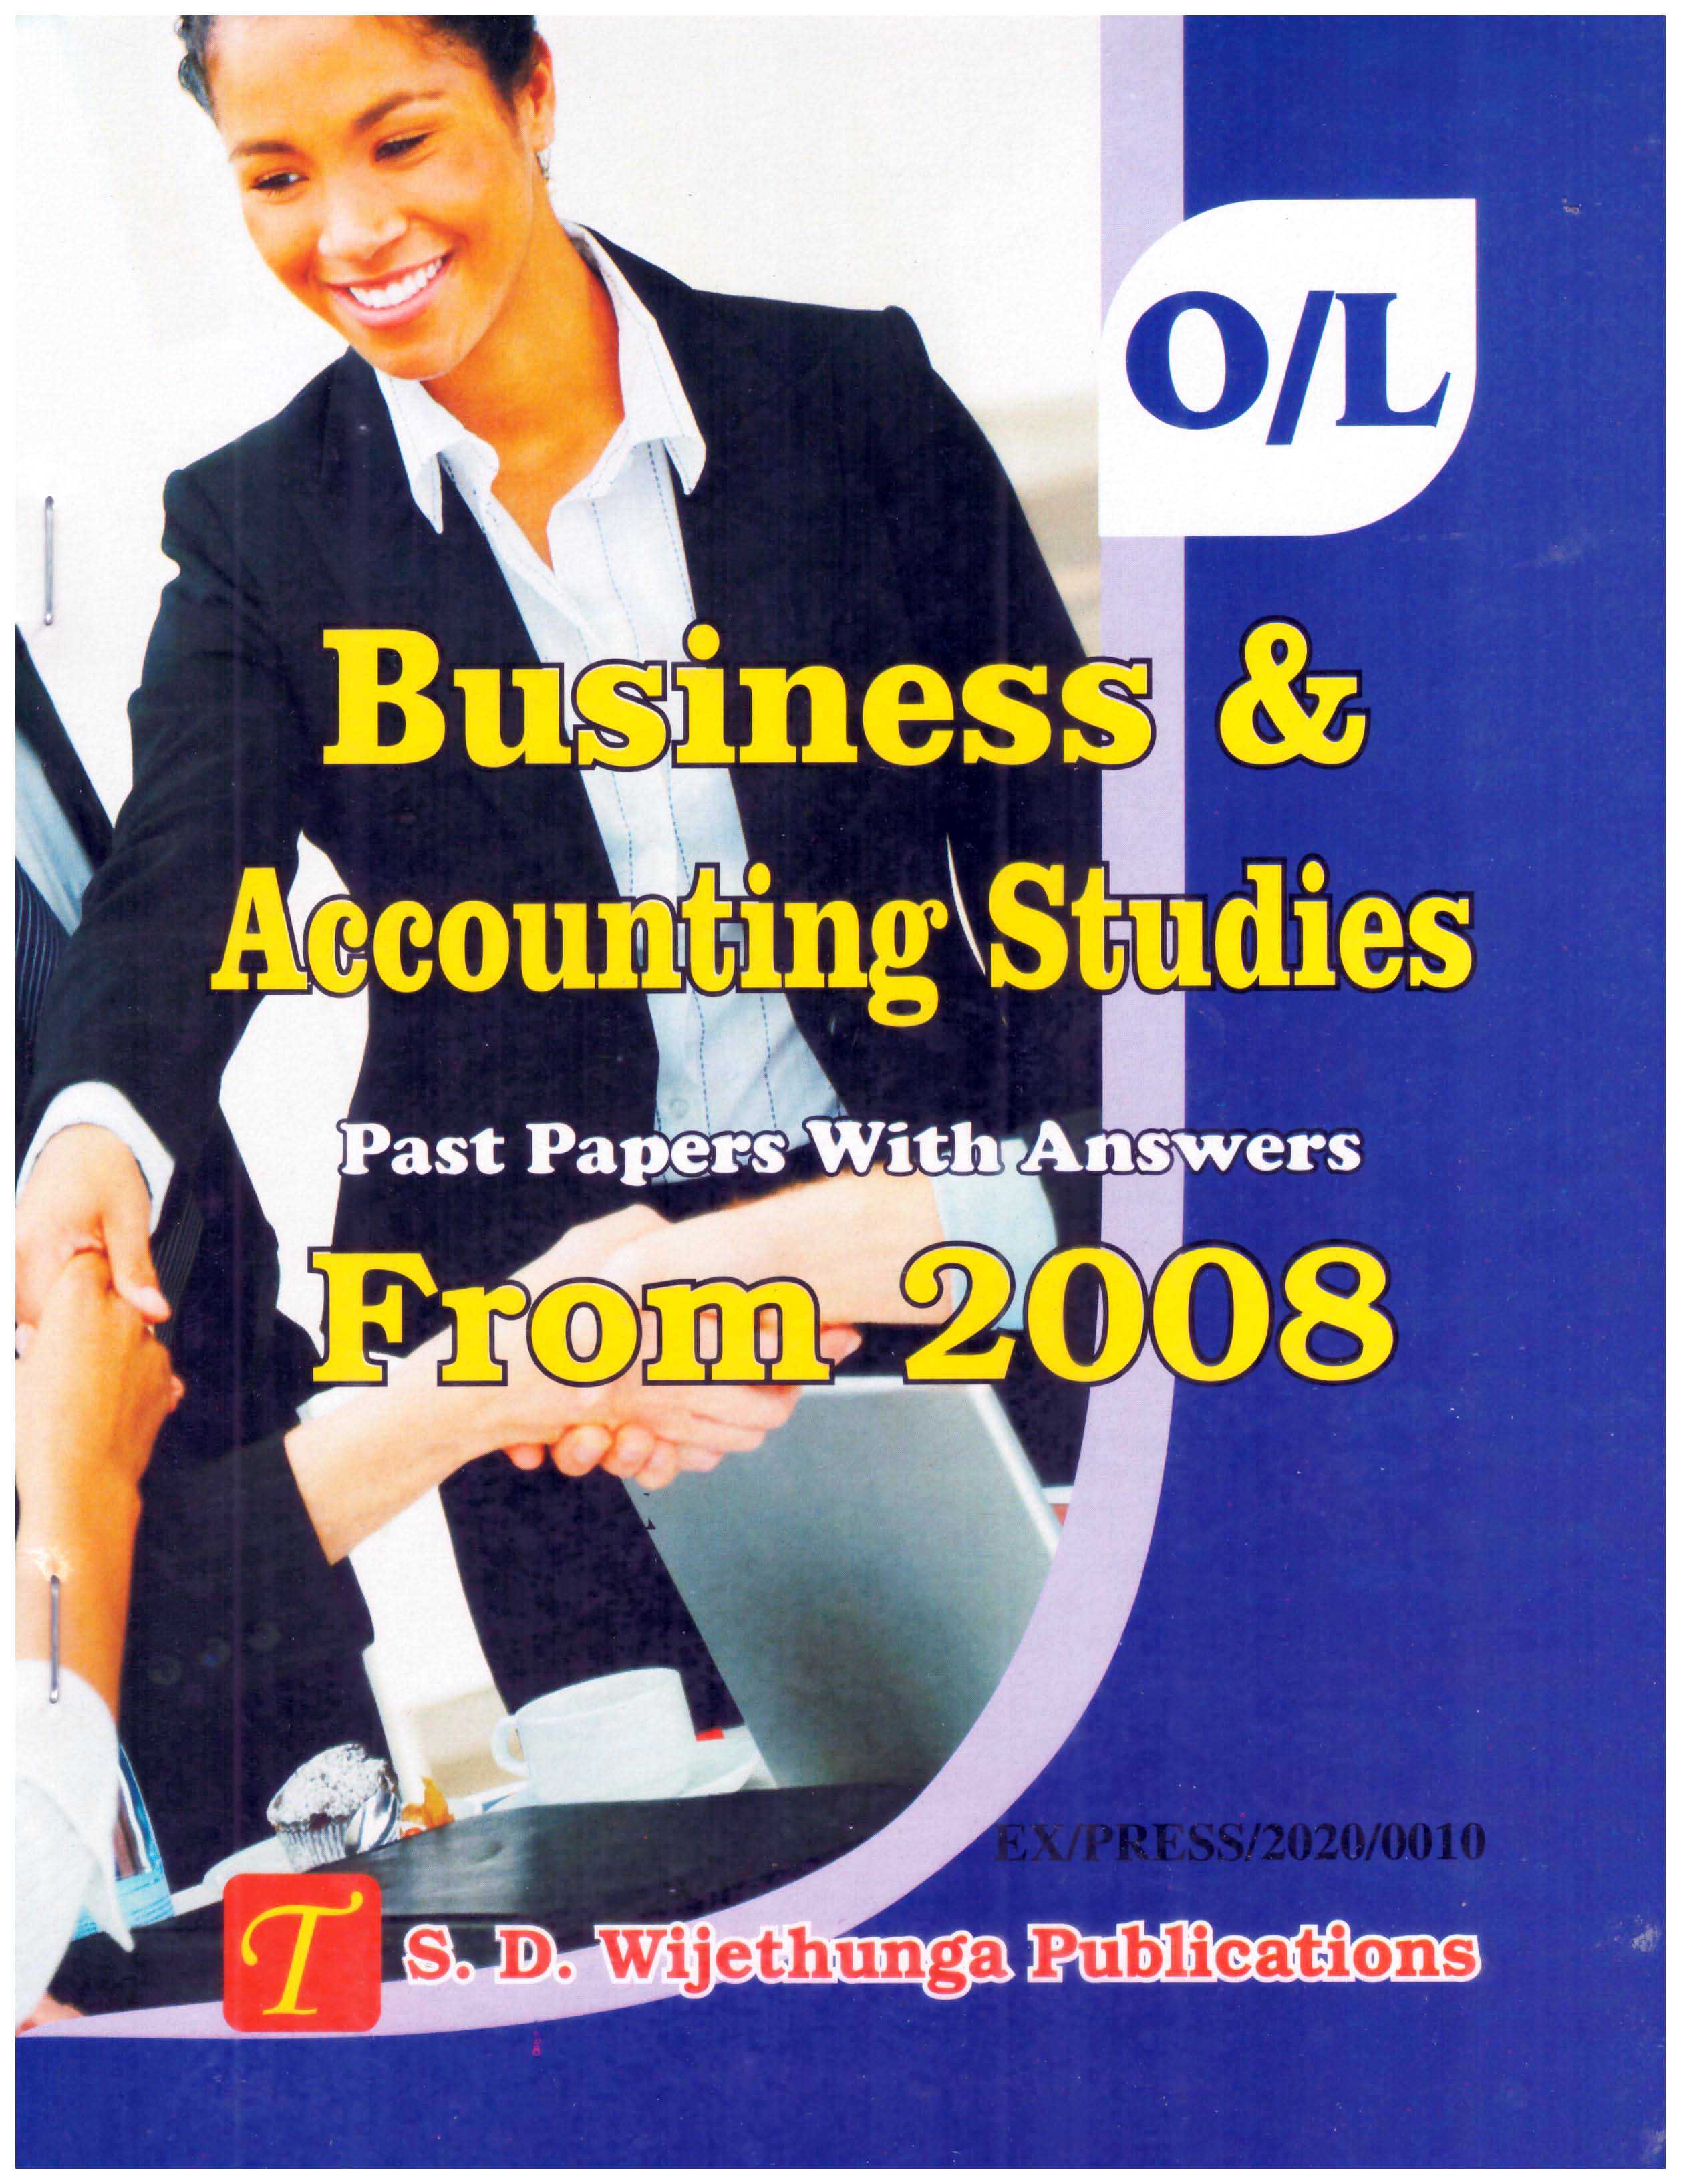 O/L Business and Accounting Studies Past Papers With Answers From 2008